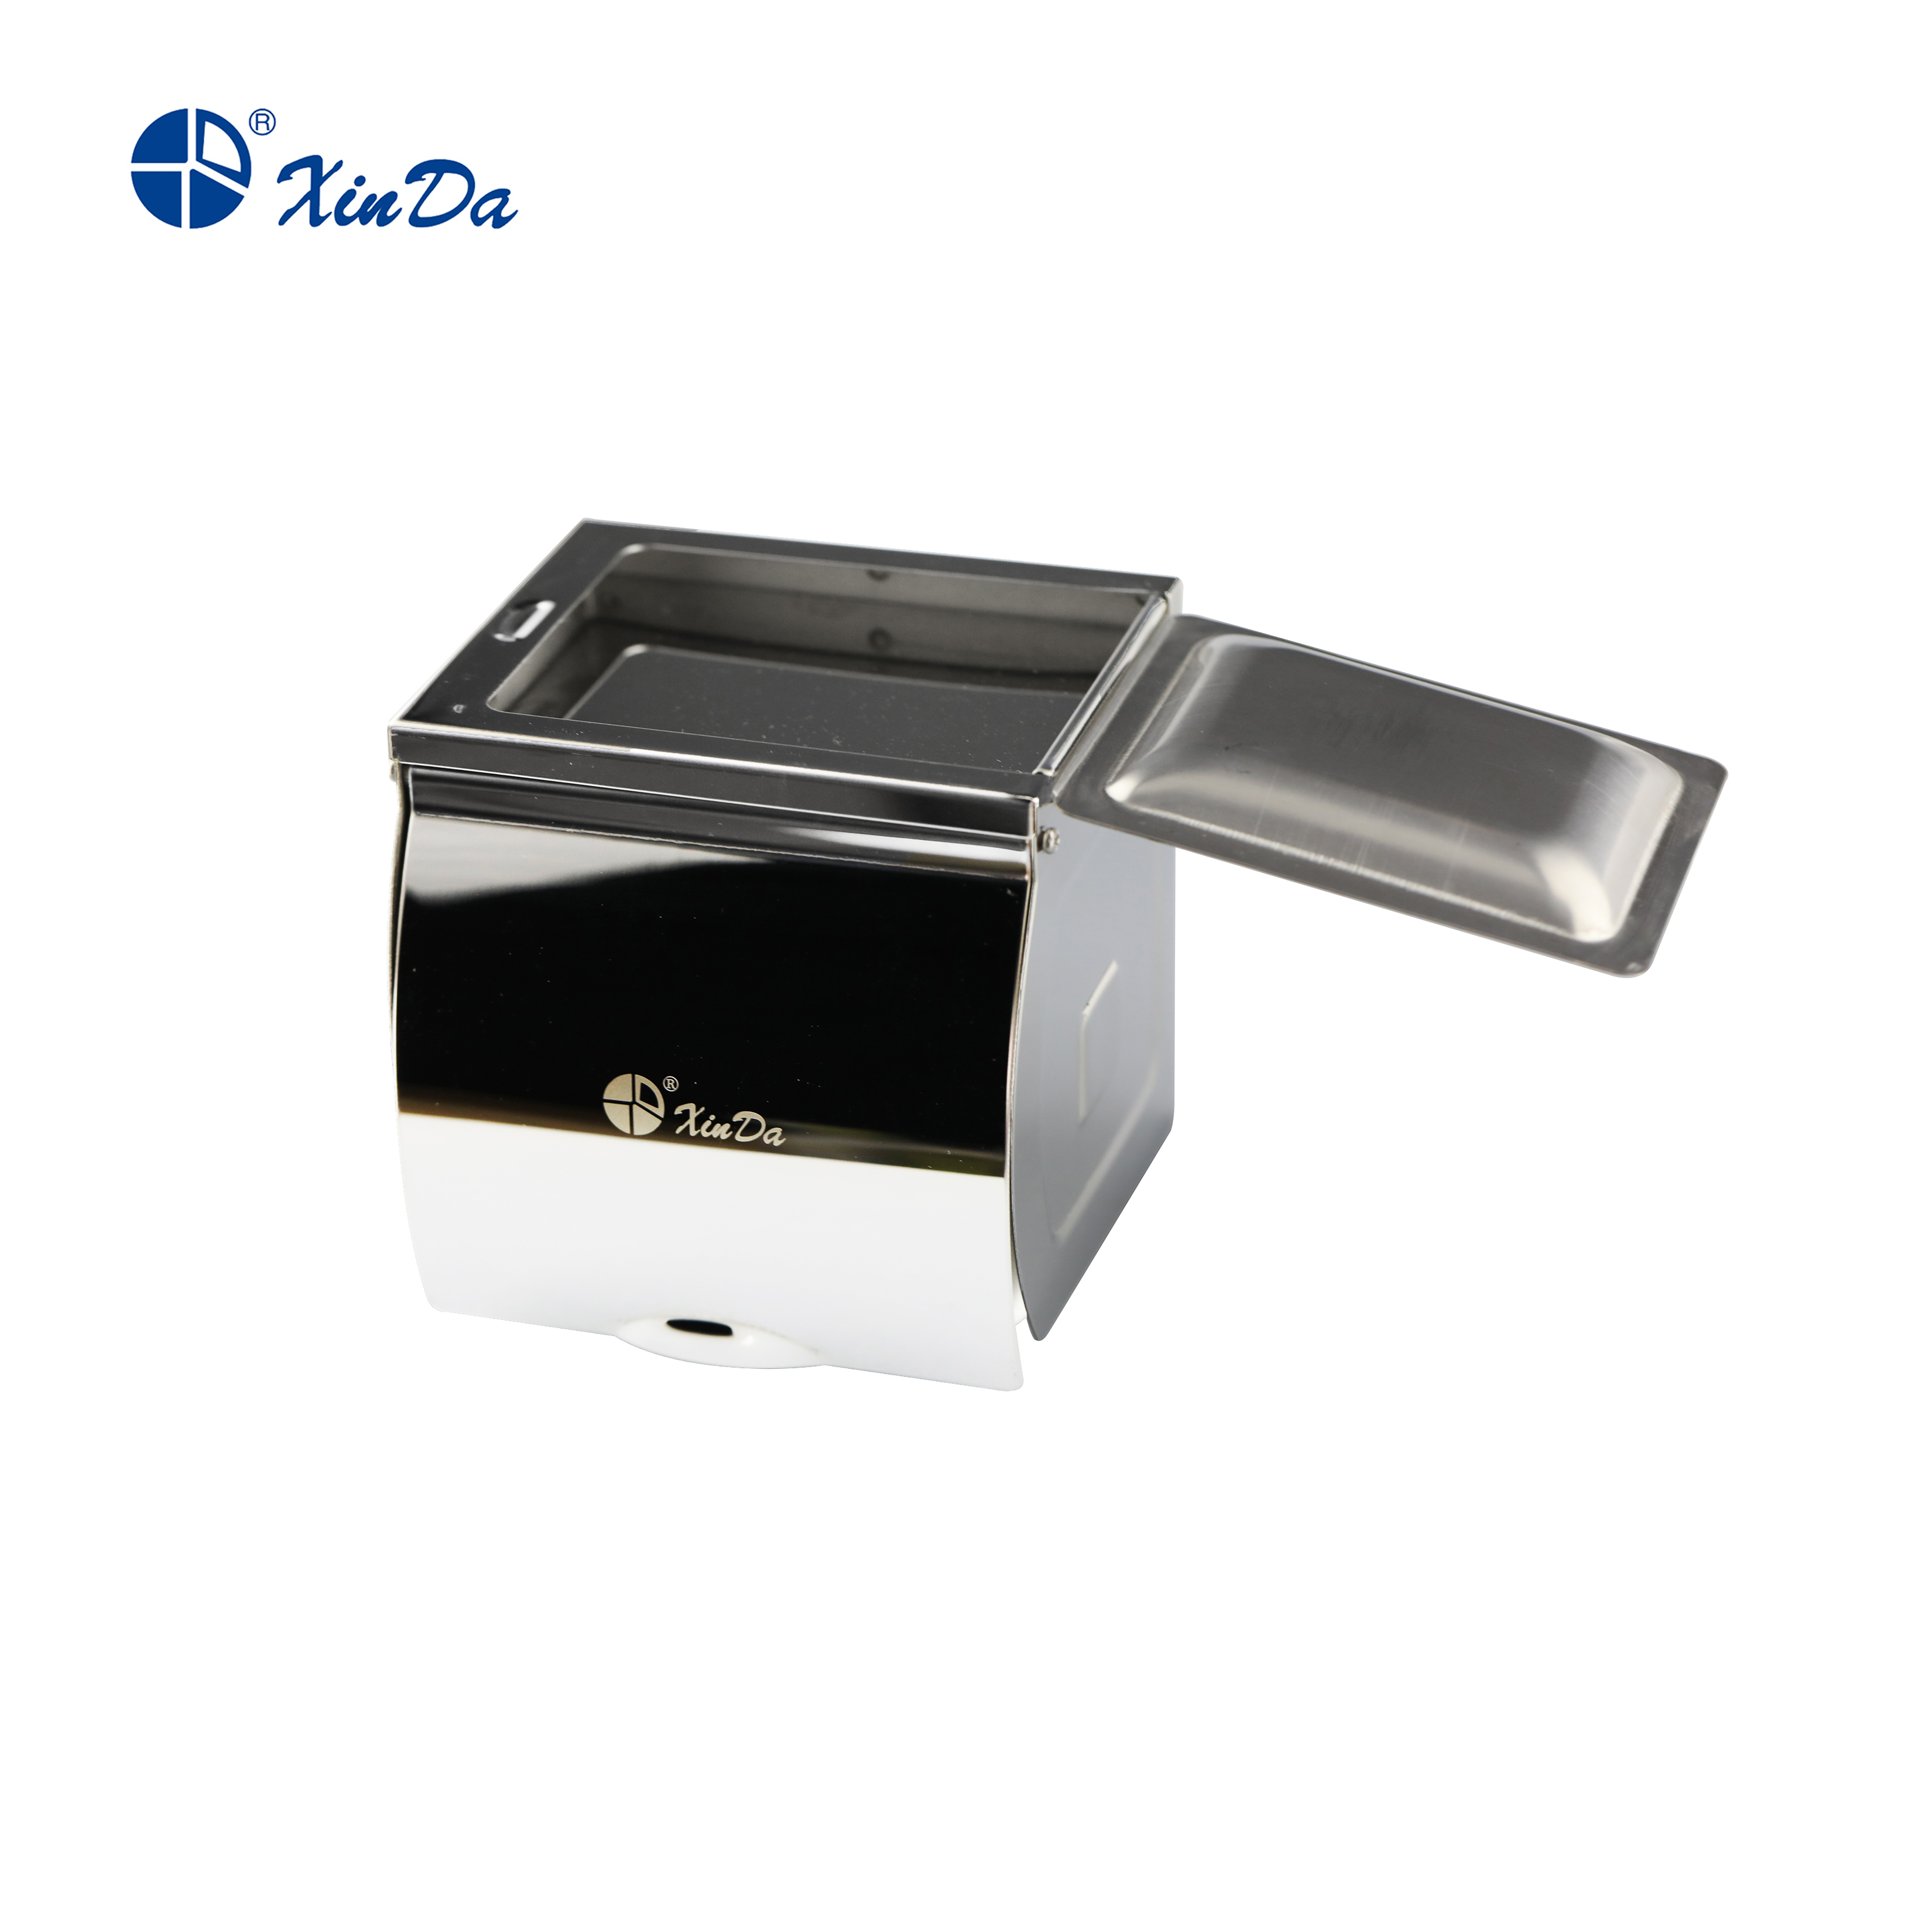 Stainless Steel Roll Paper Tissue Holder Wall Mounted Tissue Box for Home Bathroom